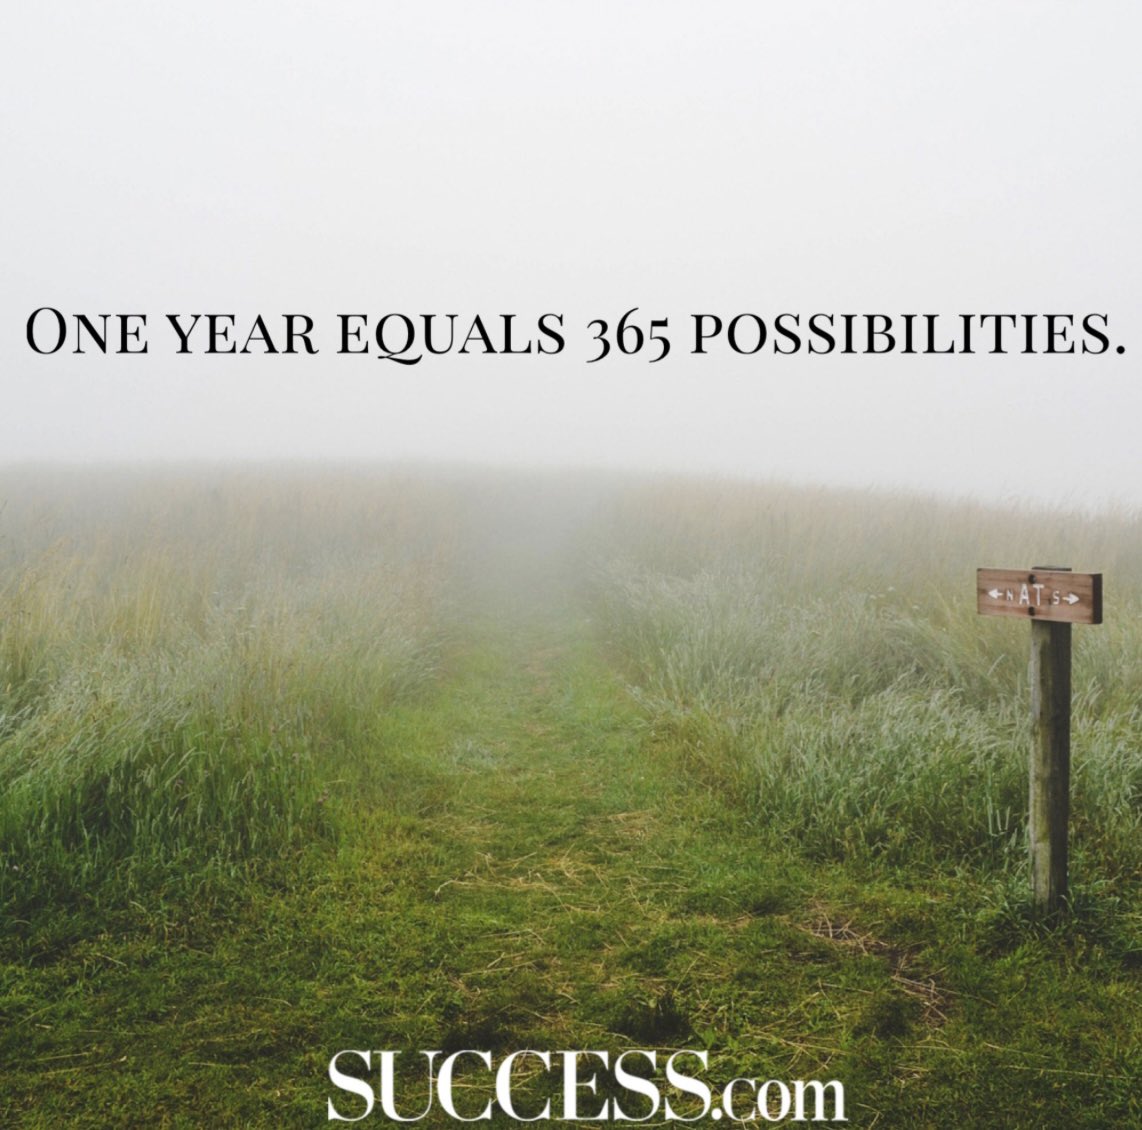 What’s your mantra for 2️⃣0️⃣2️⃣4️⃣? 
I love this one by @successmagazine, “One year equals 365 possibilities.”